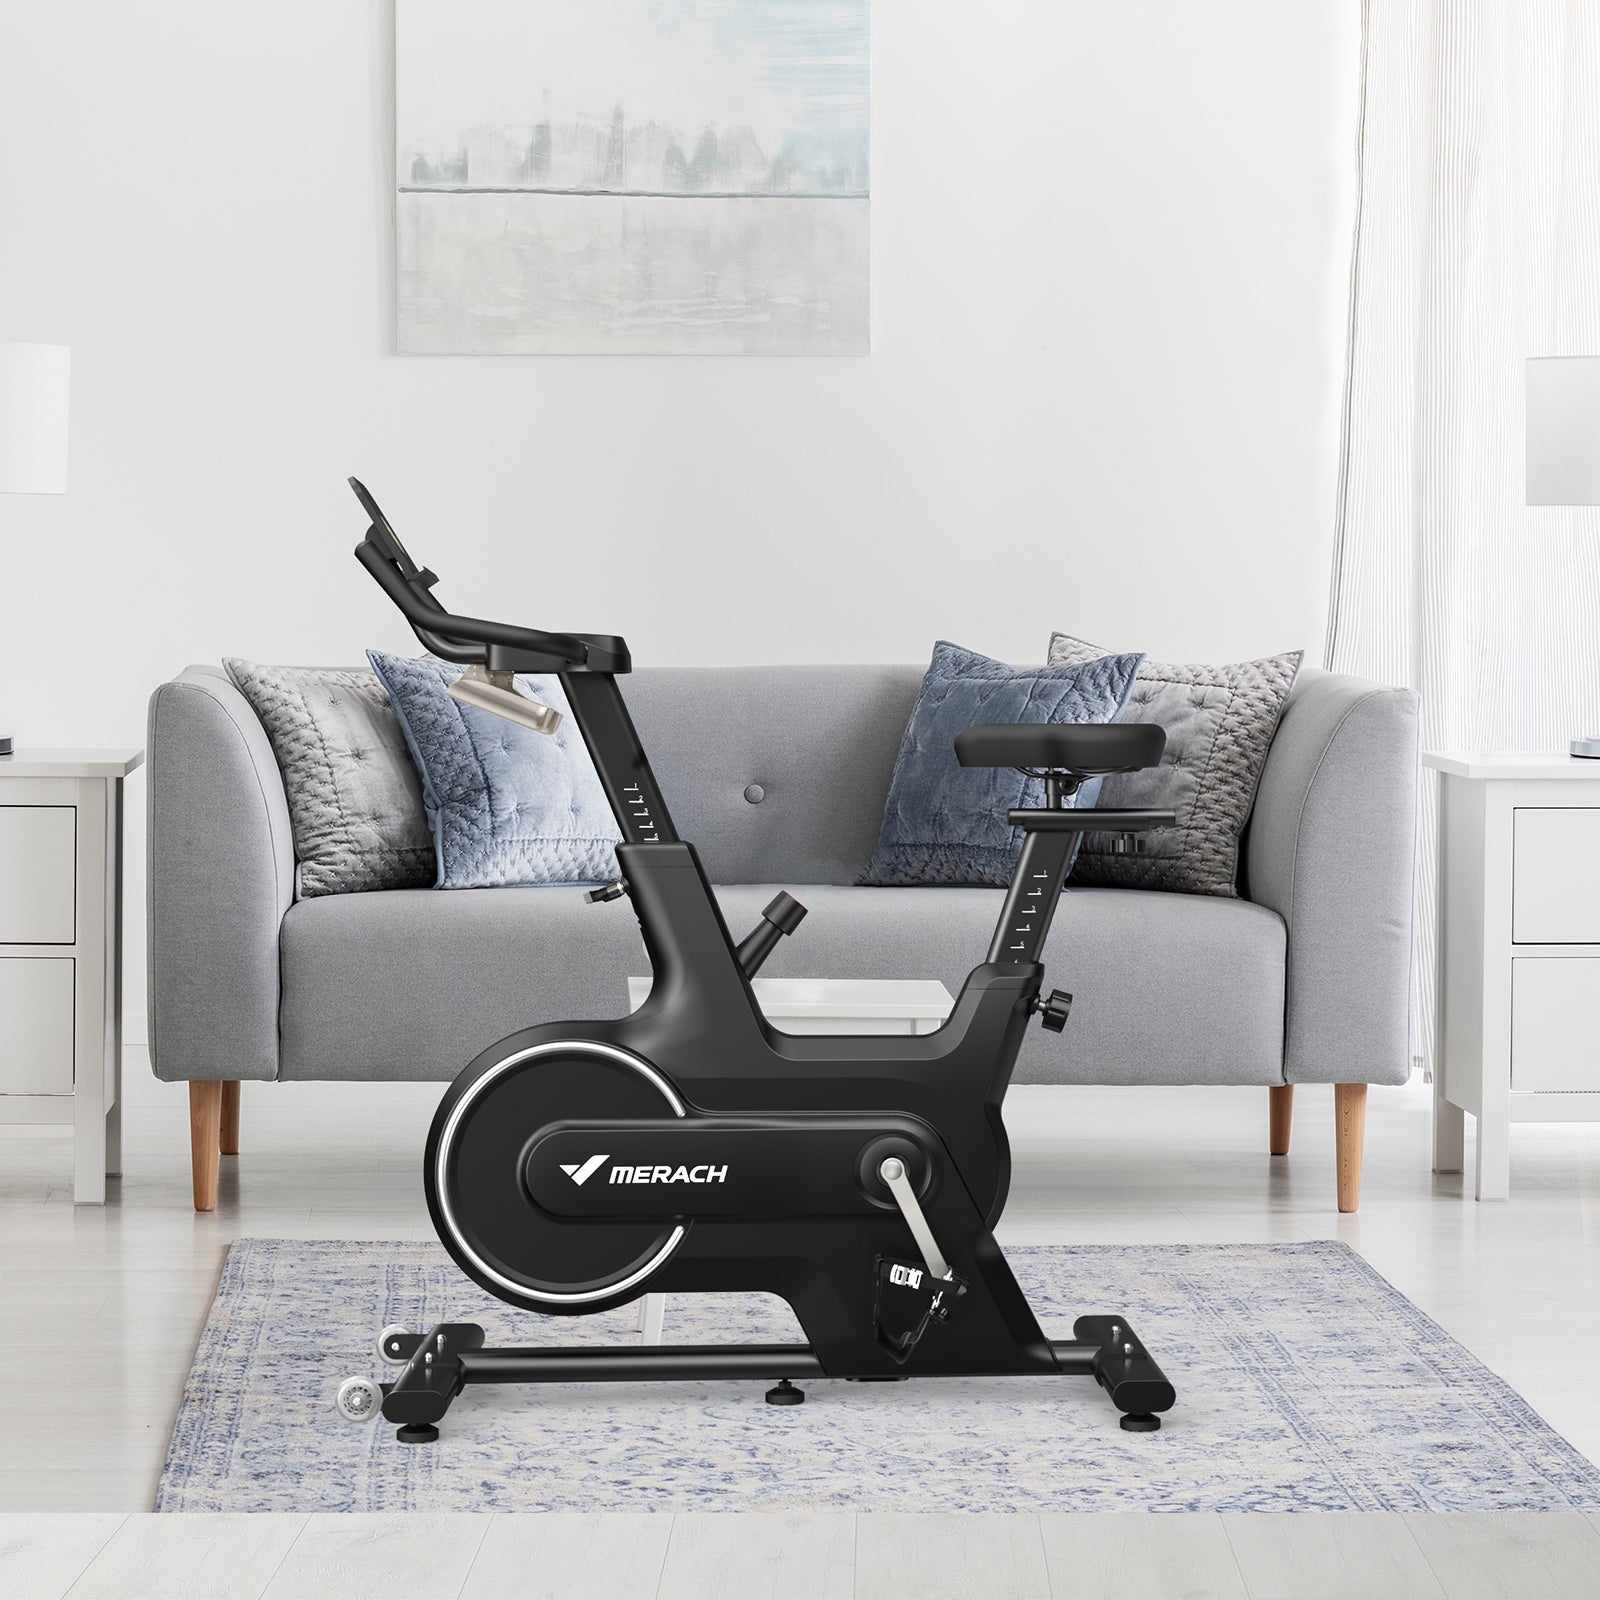 MERACH - CC All-Rounded Exercise Bike